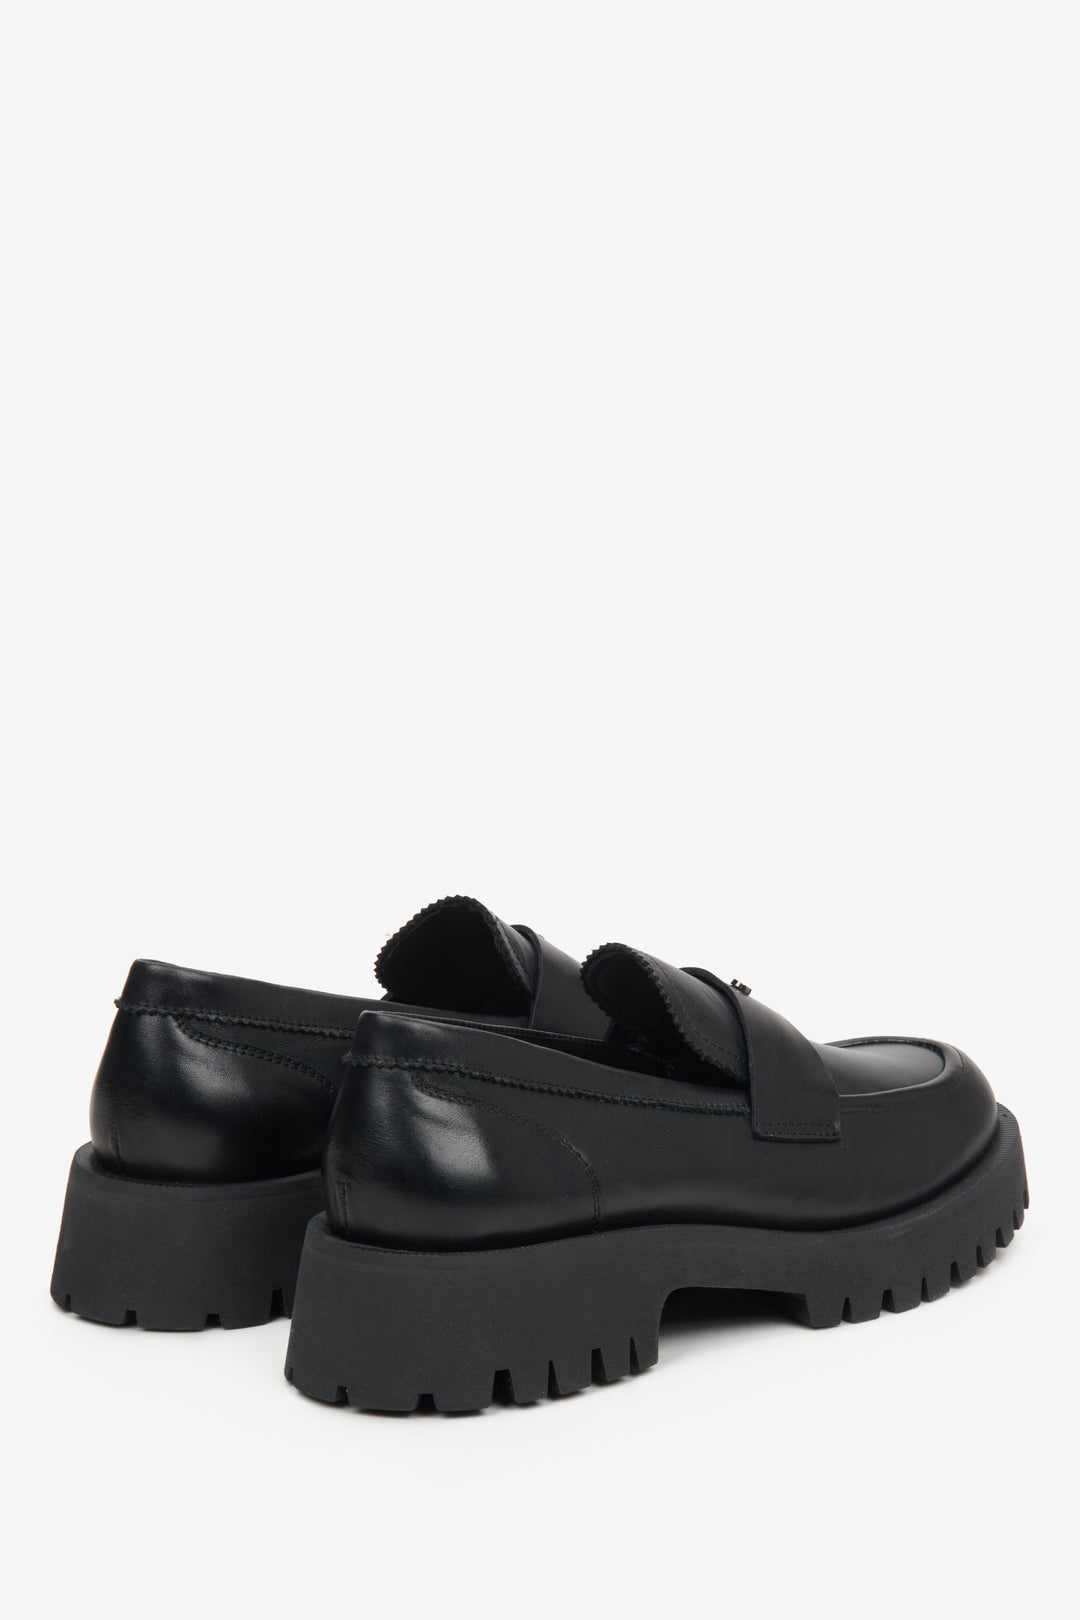 Estro women's loafers in black, made of genuine leather.